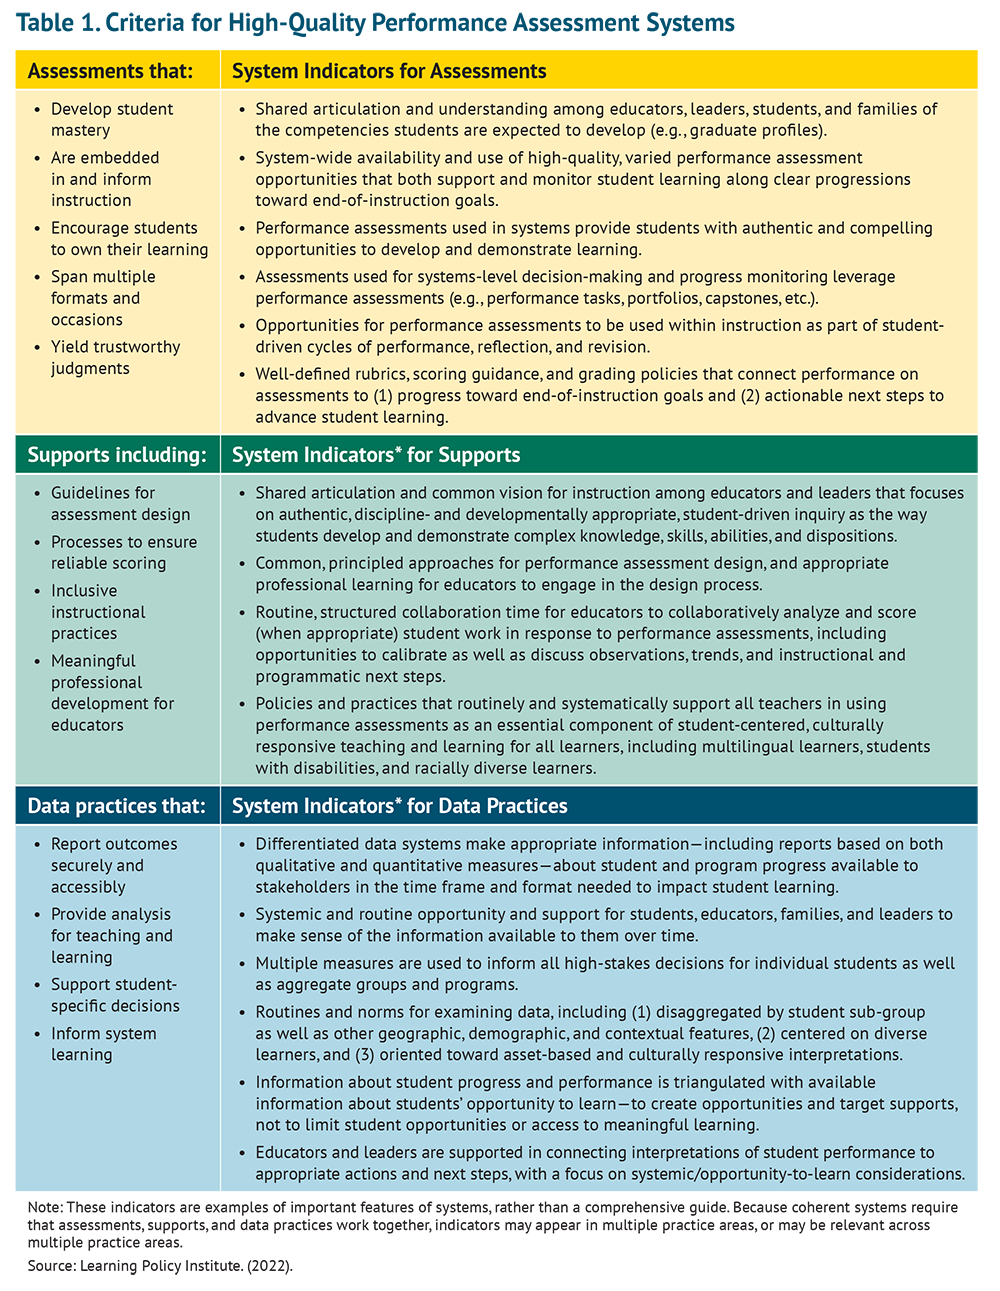 Table 1: Criteria for High-Quality Performance Assessment Systems